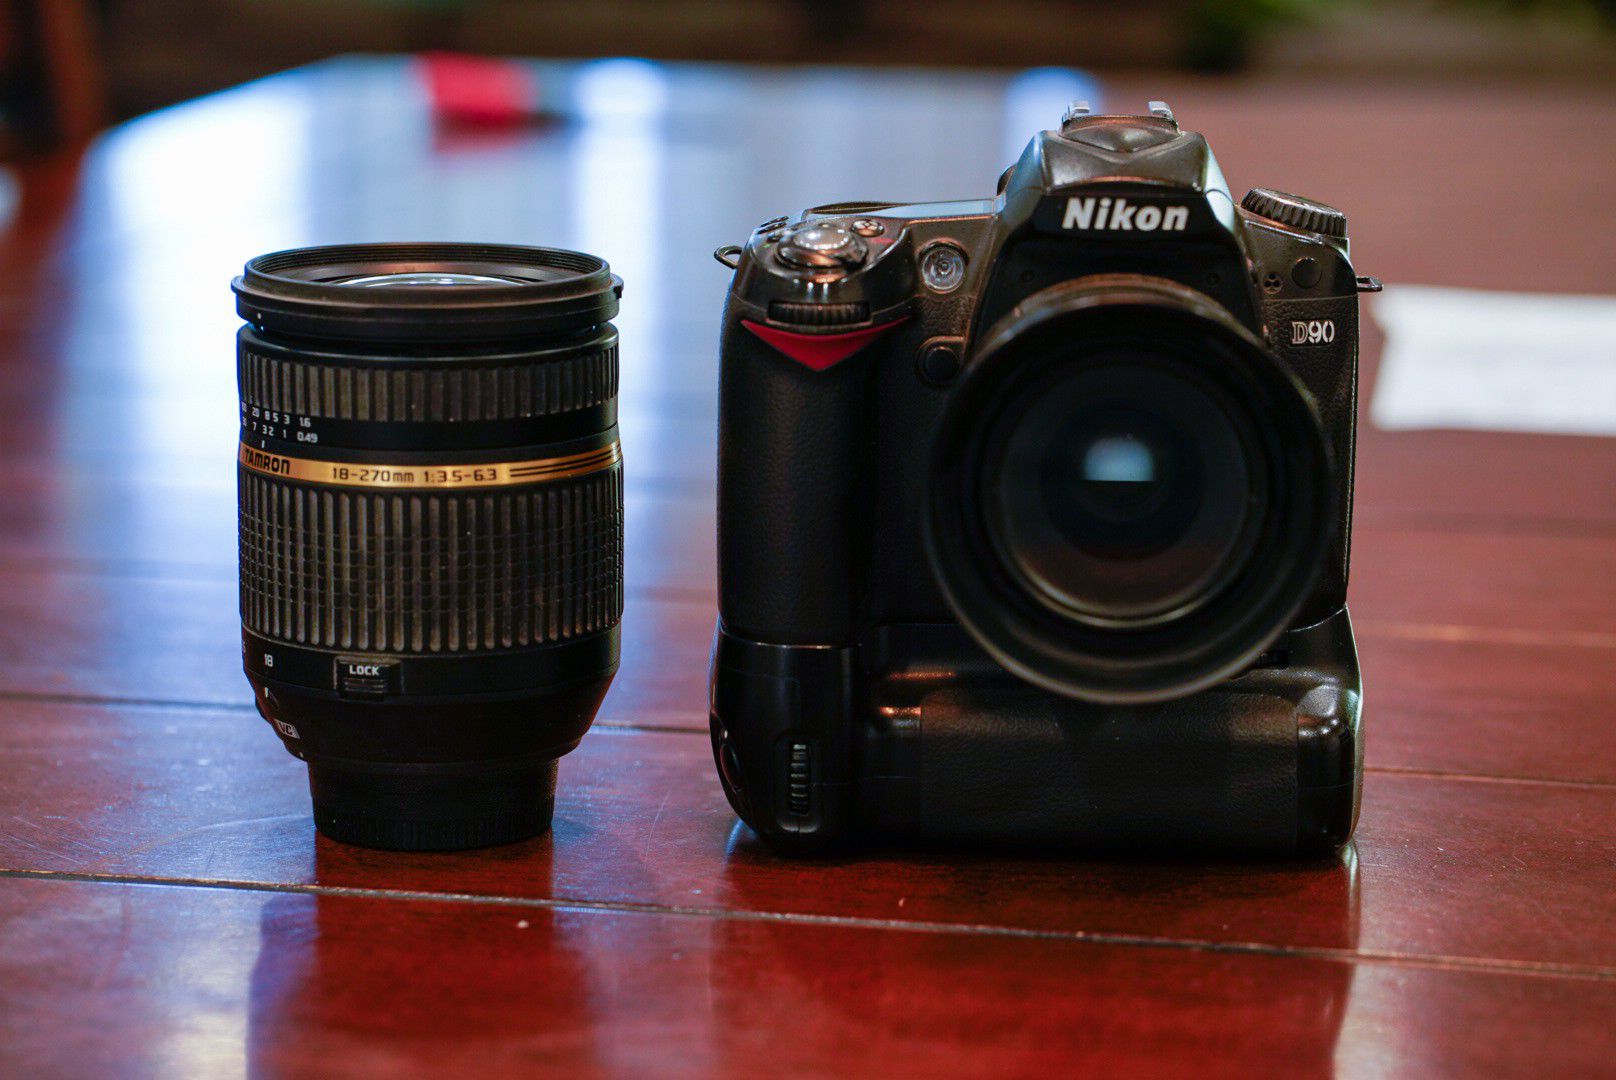 Nikon D90 with two lens